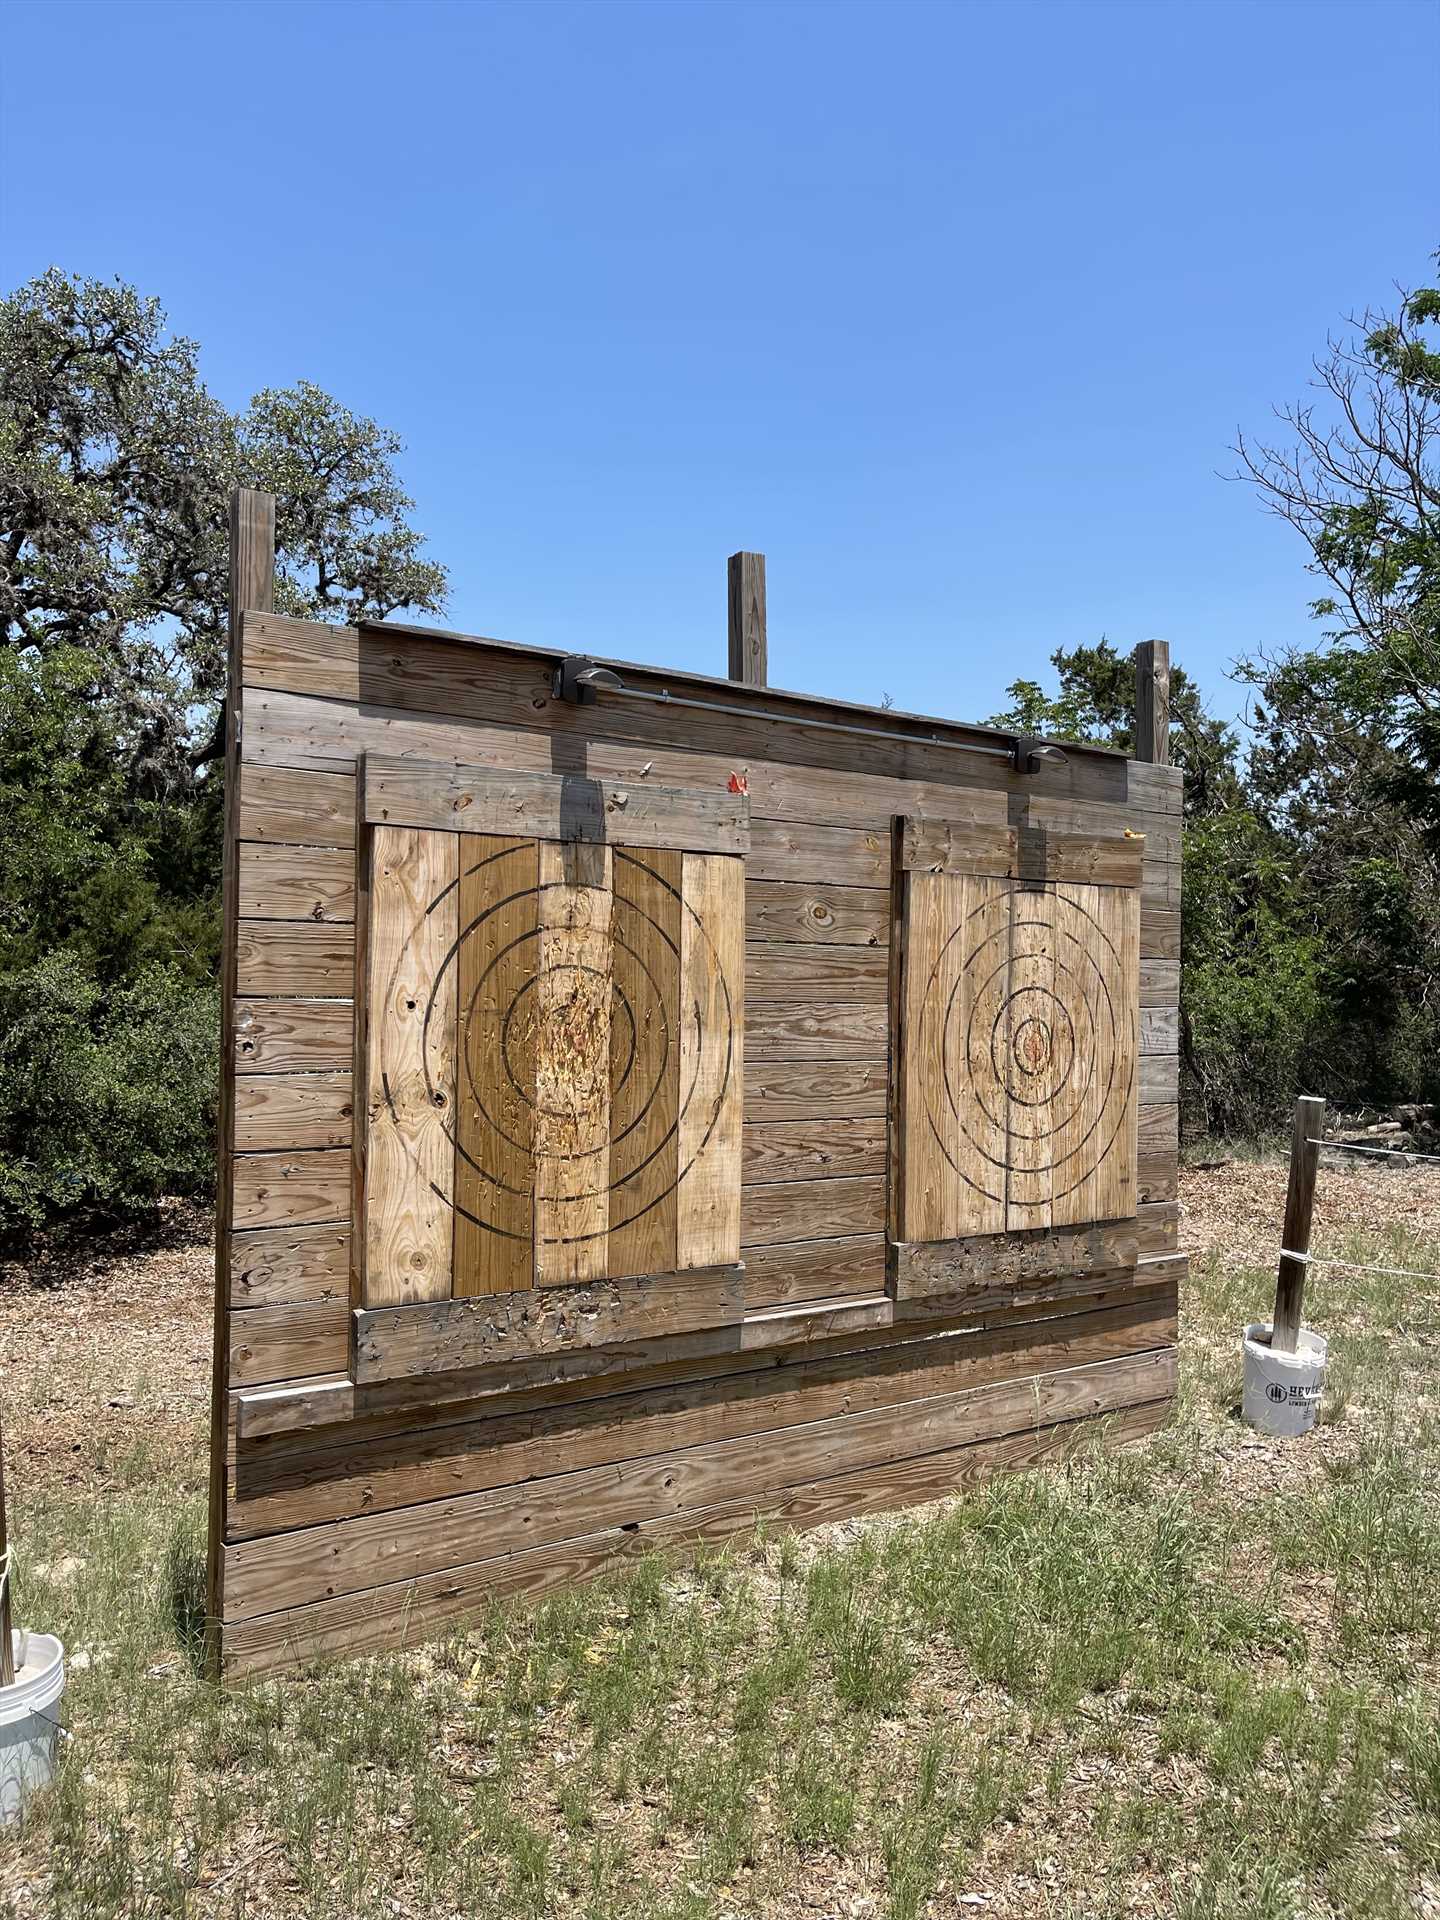                                                 How many places will you get the opportunity to hone your axe-throwing skills? Give it a try at the Nest Cabin Resort!